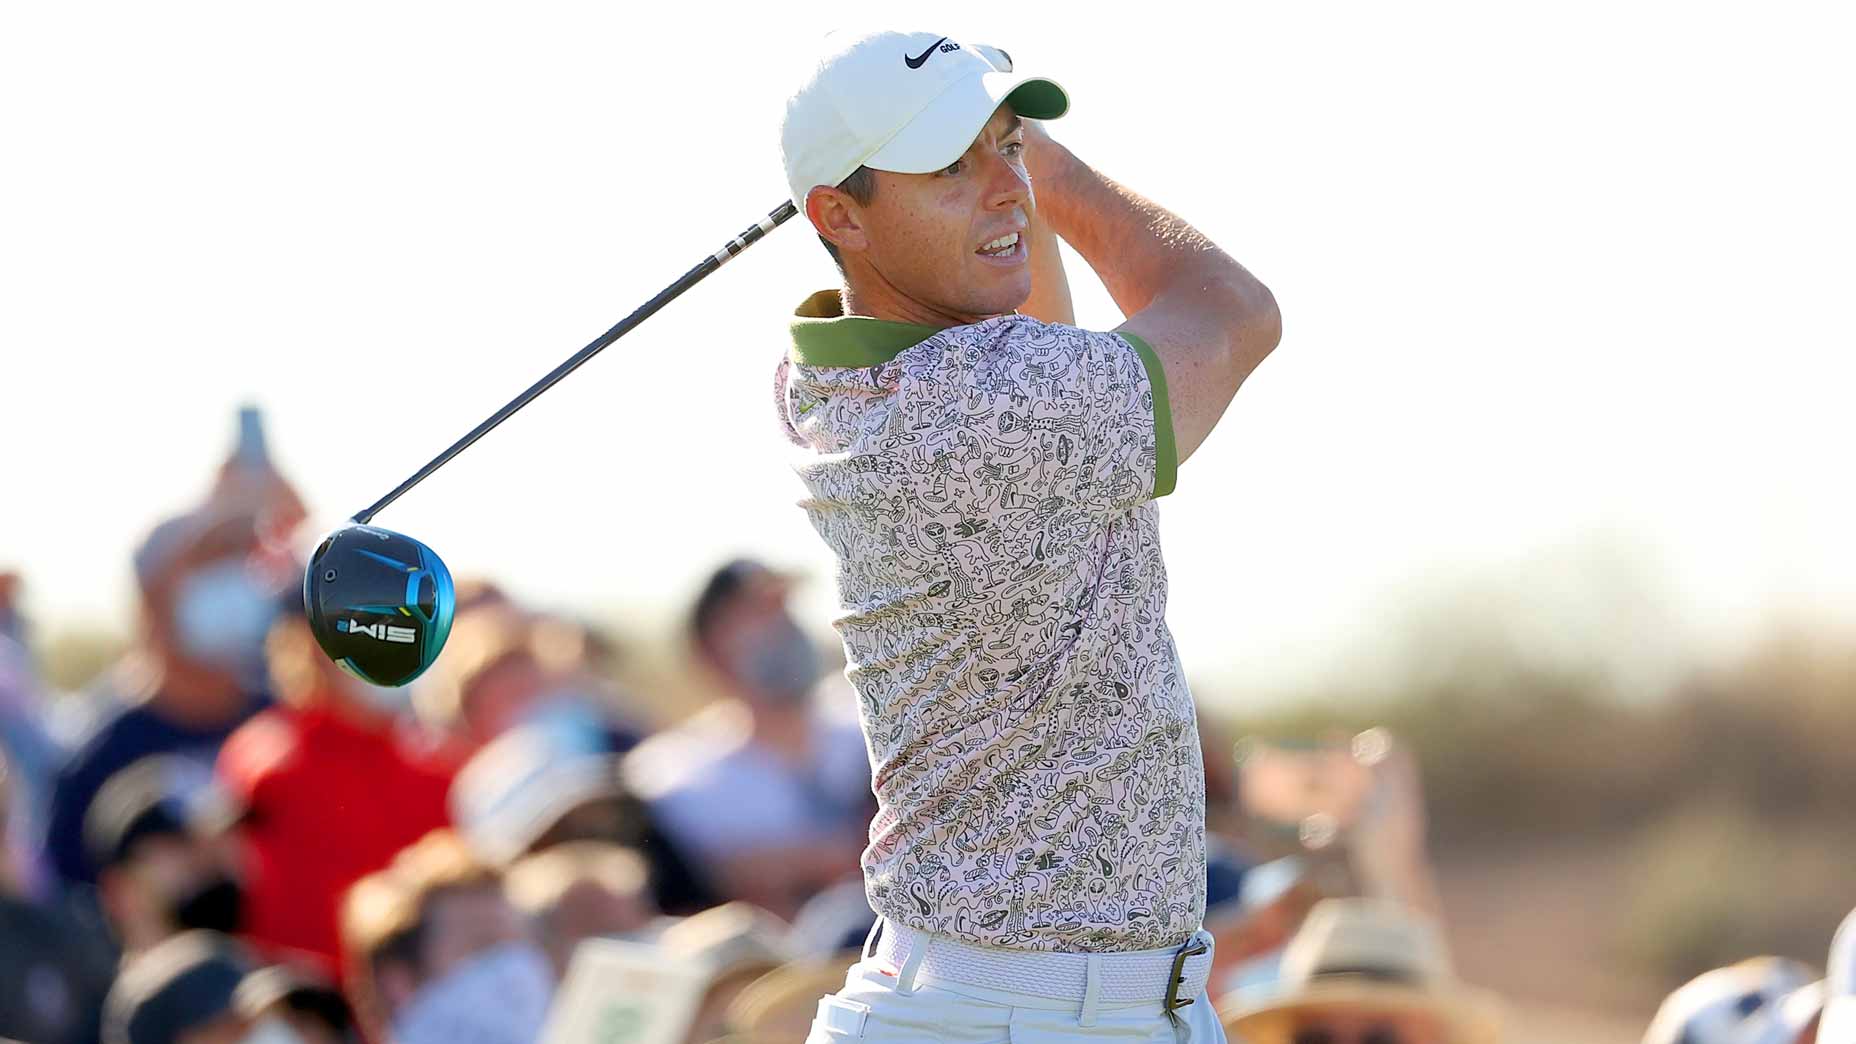 Rory McIlroy watches drive at the 2021 WM Phoenix Open